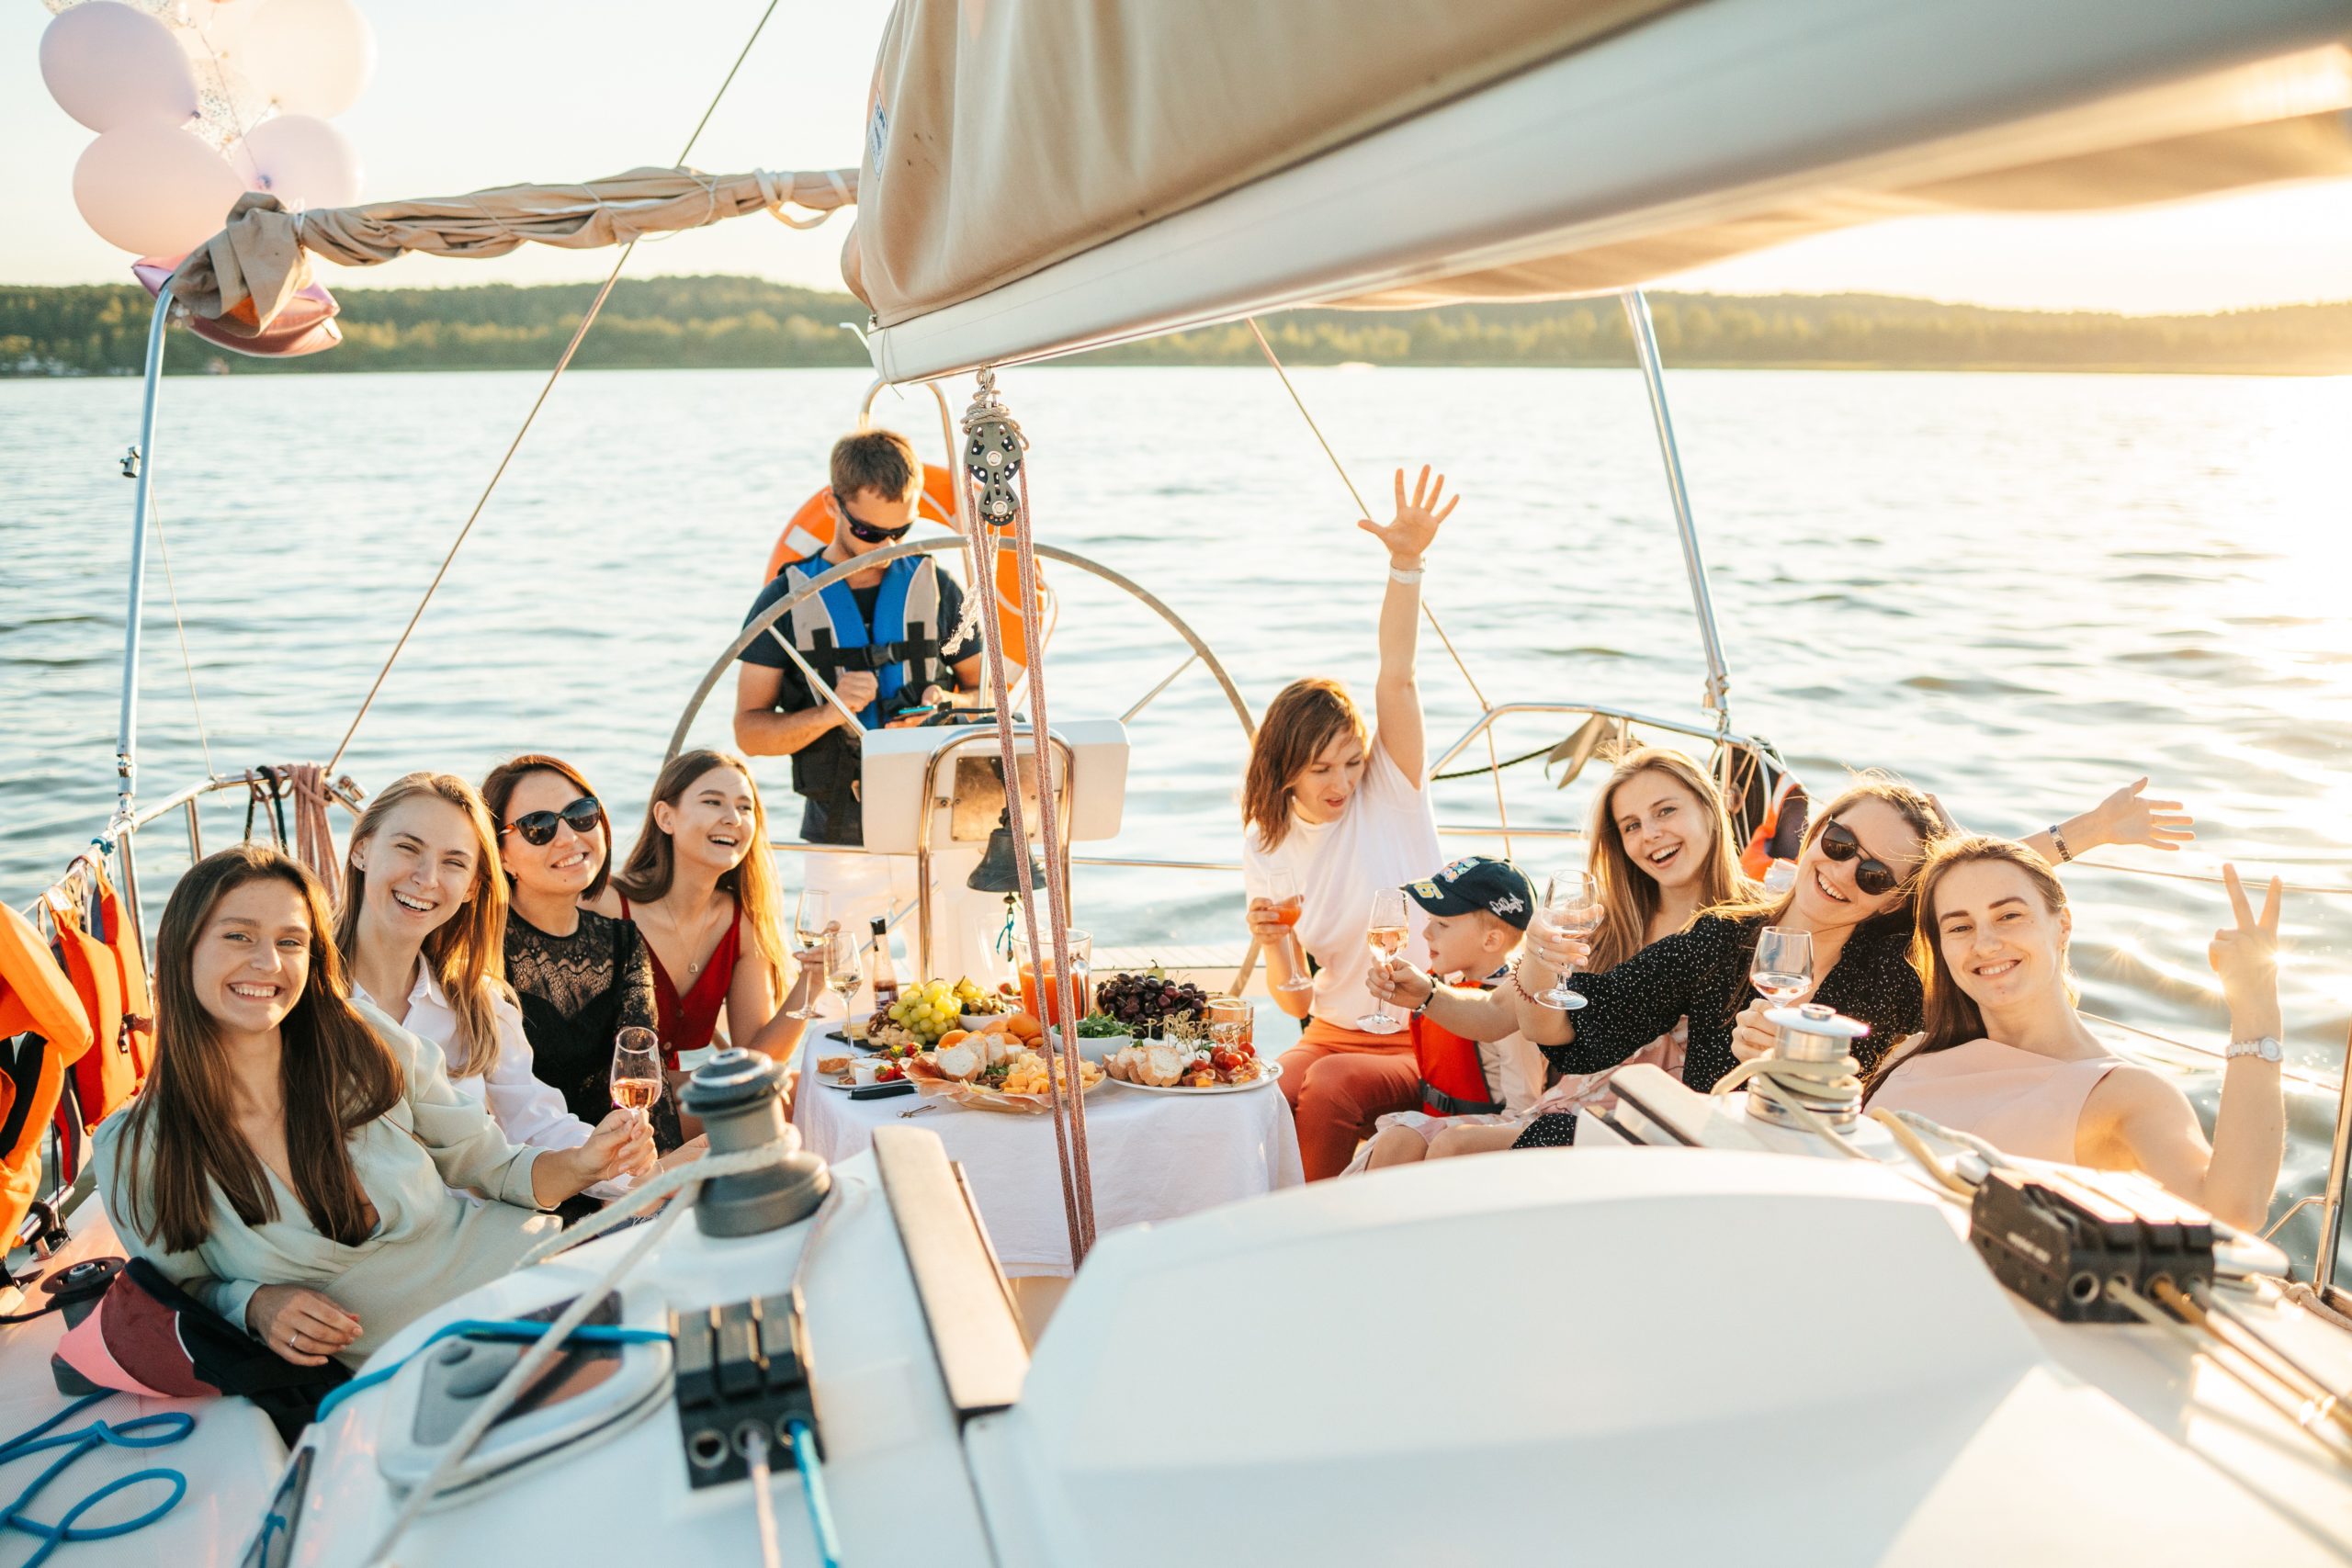 group of people enjoy a meal on a boat